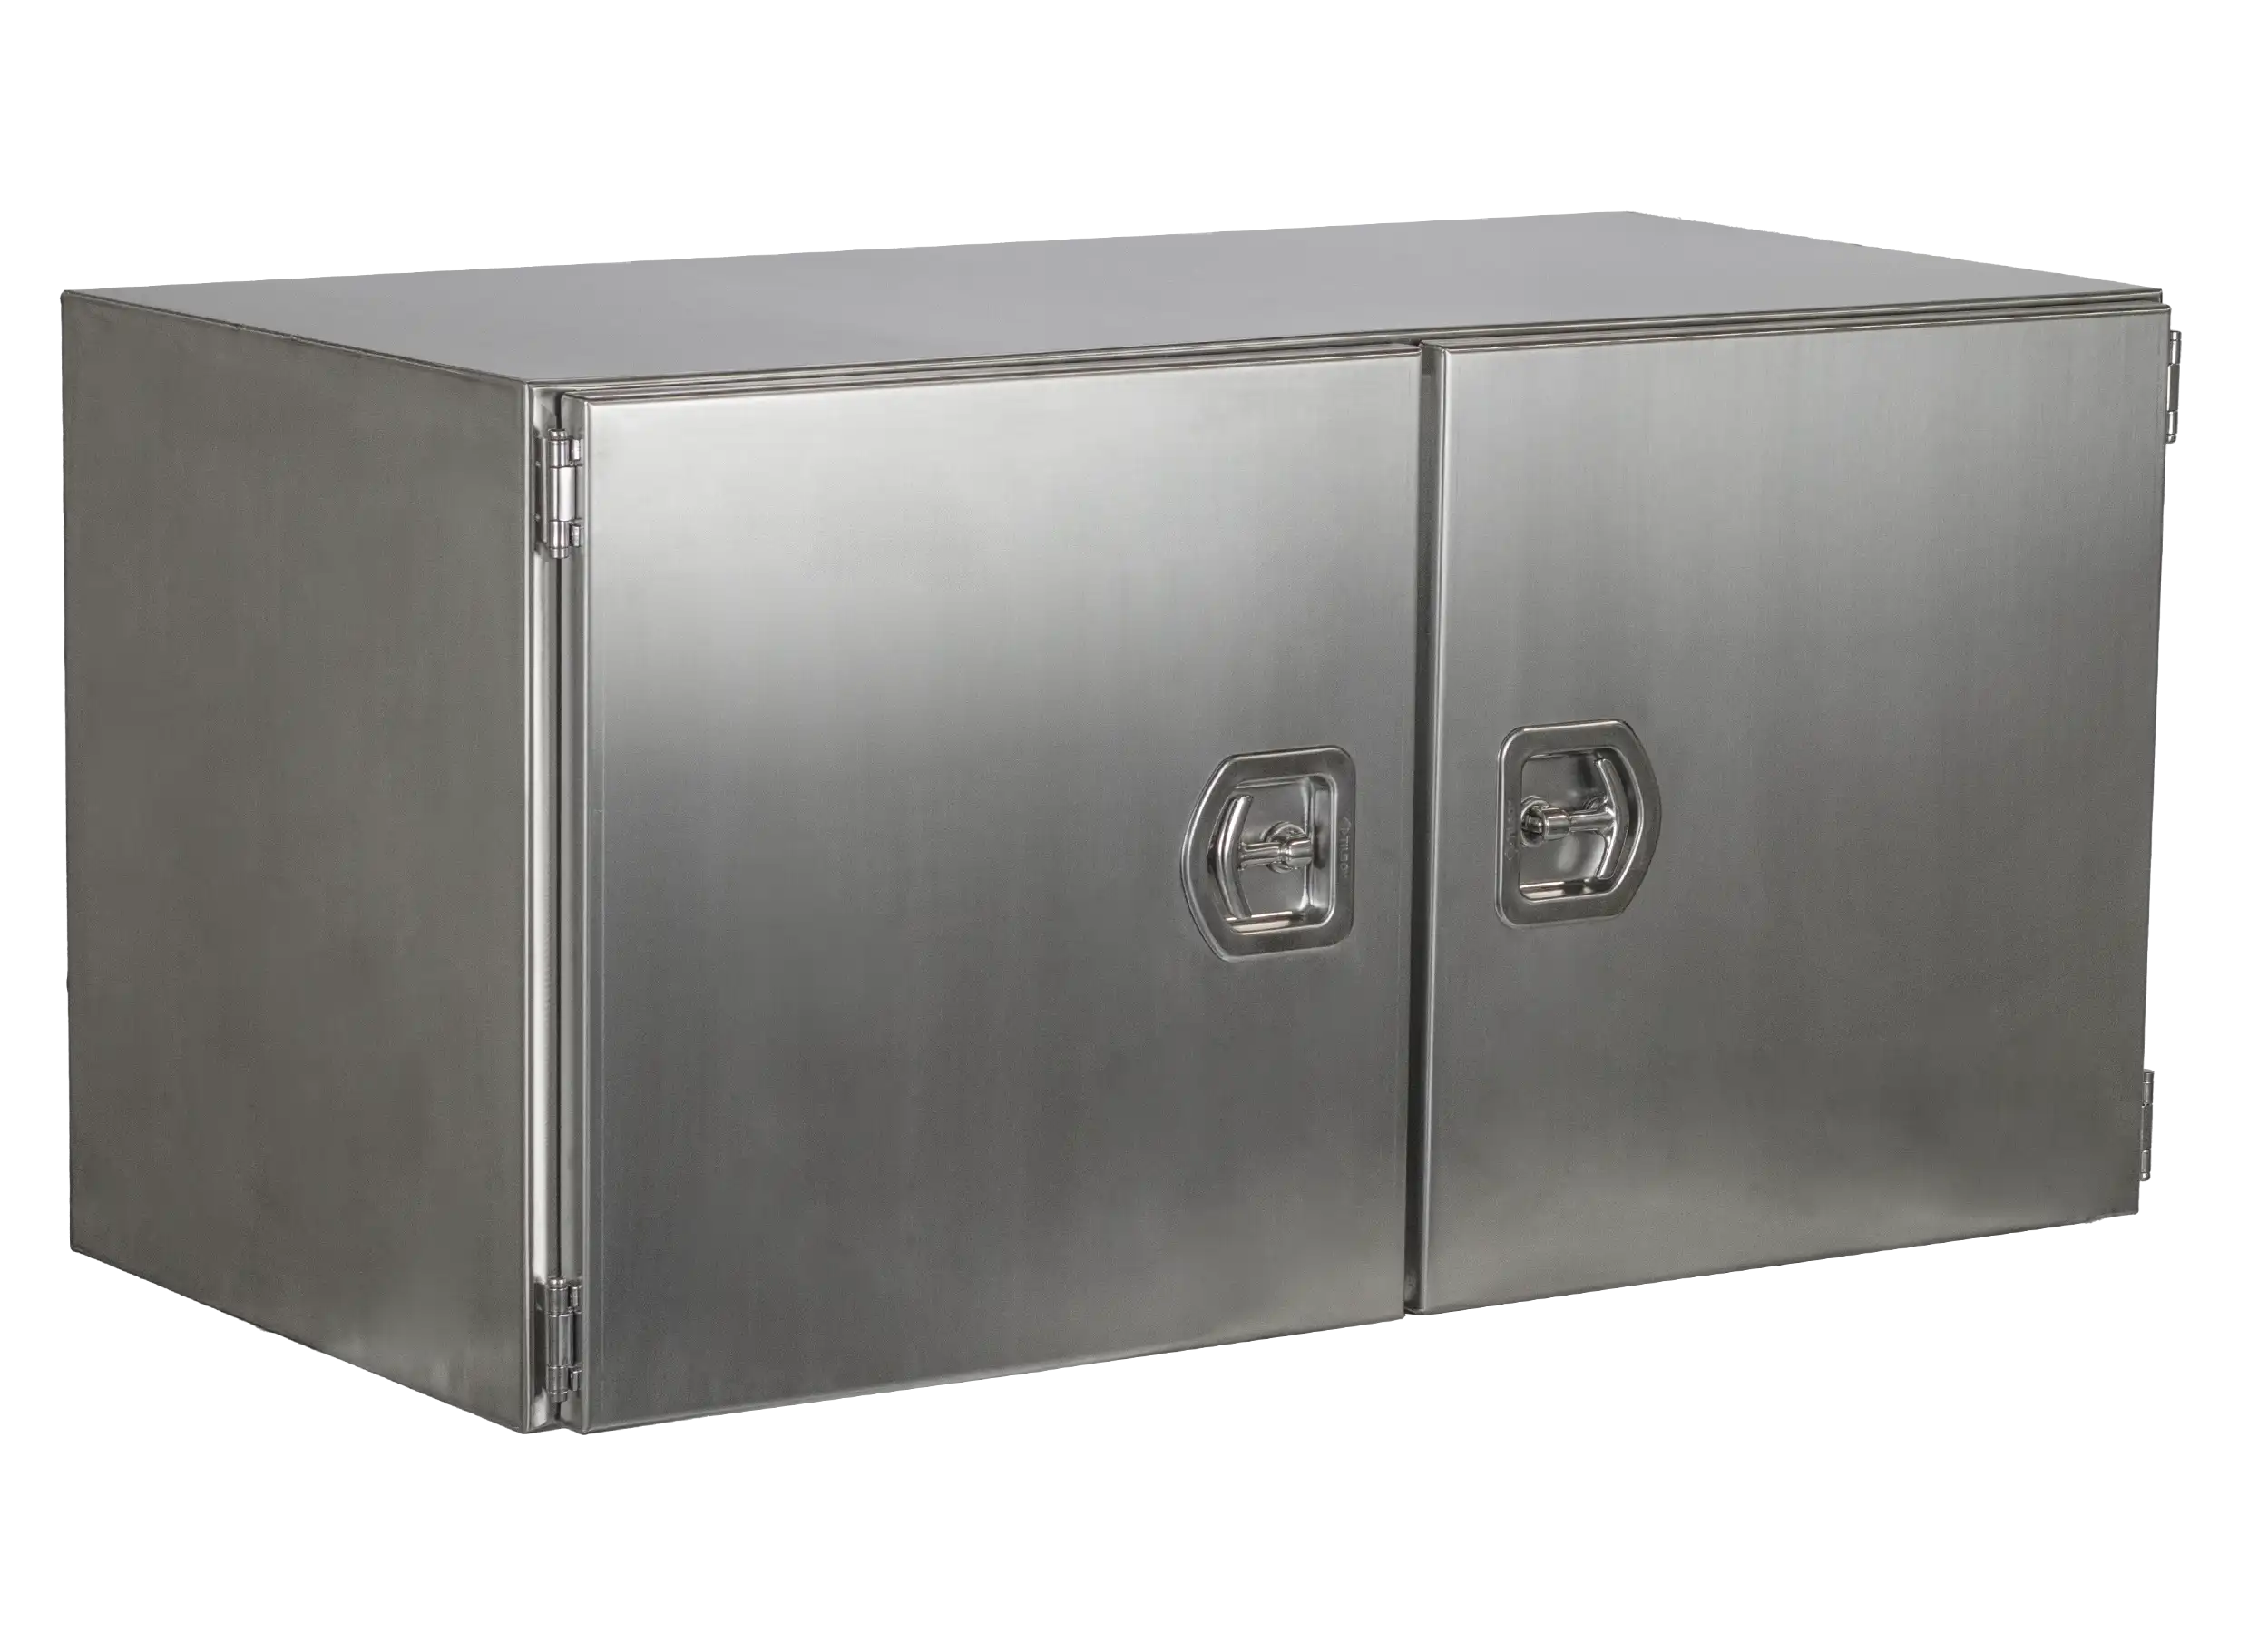 Toolbox - Stainless Steel - Double doors - 1000x500x500 mm